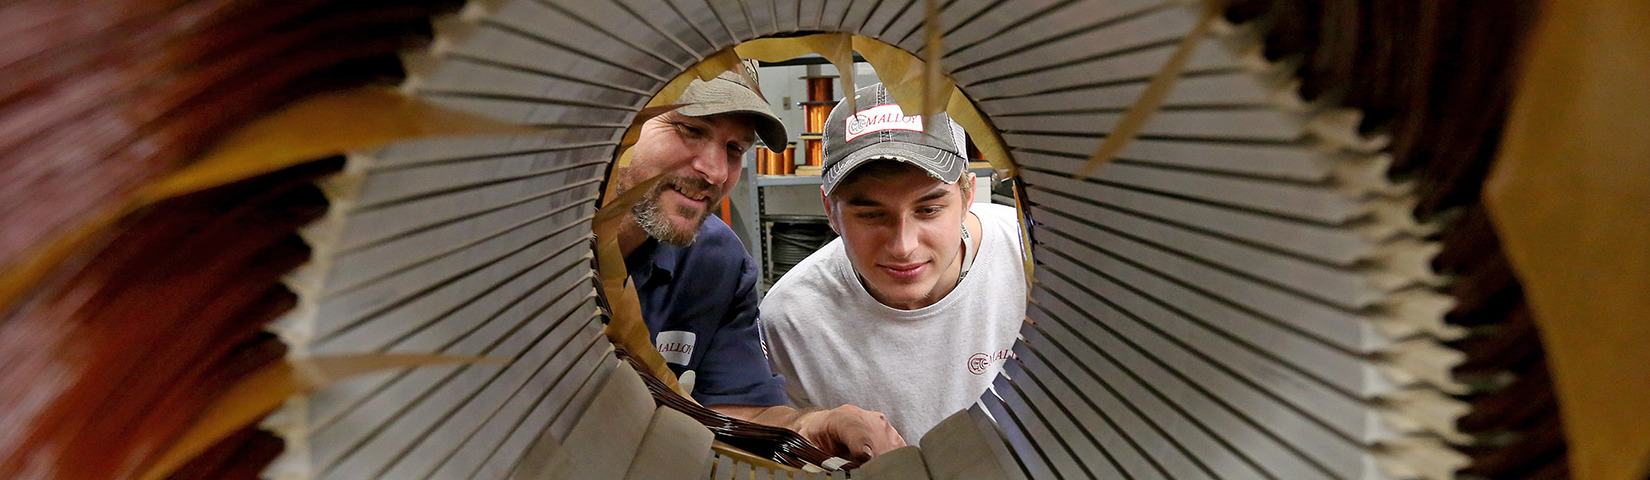 Talent Attraction Survey 2021 Encourages Greater Support Among South Dakota’s Manufacturers